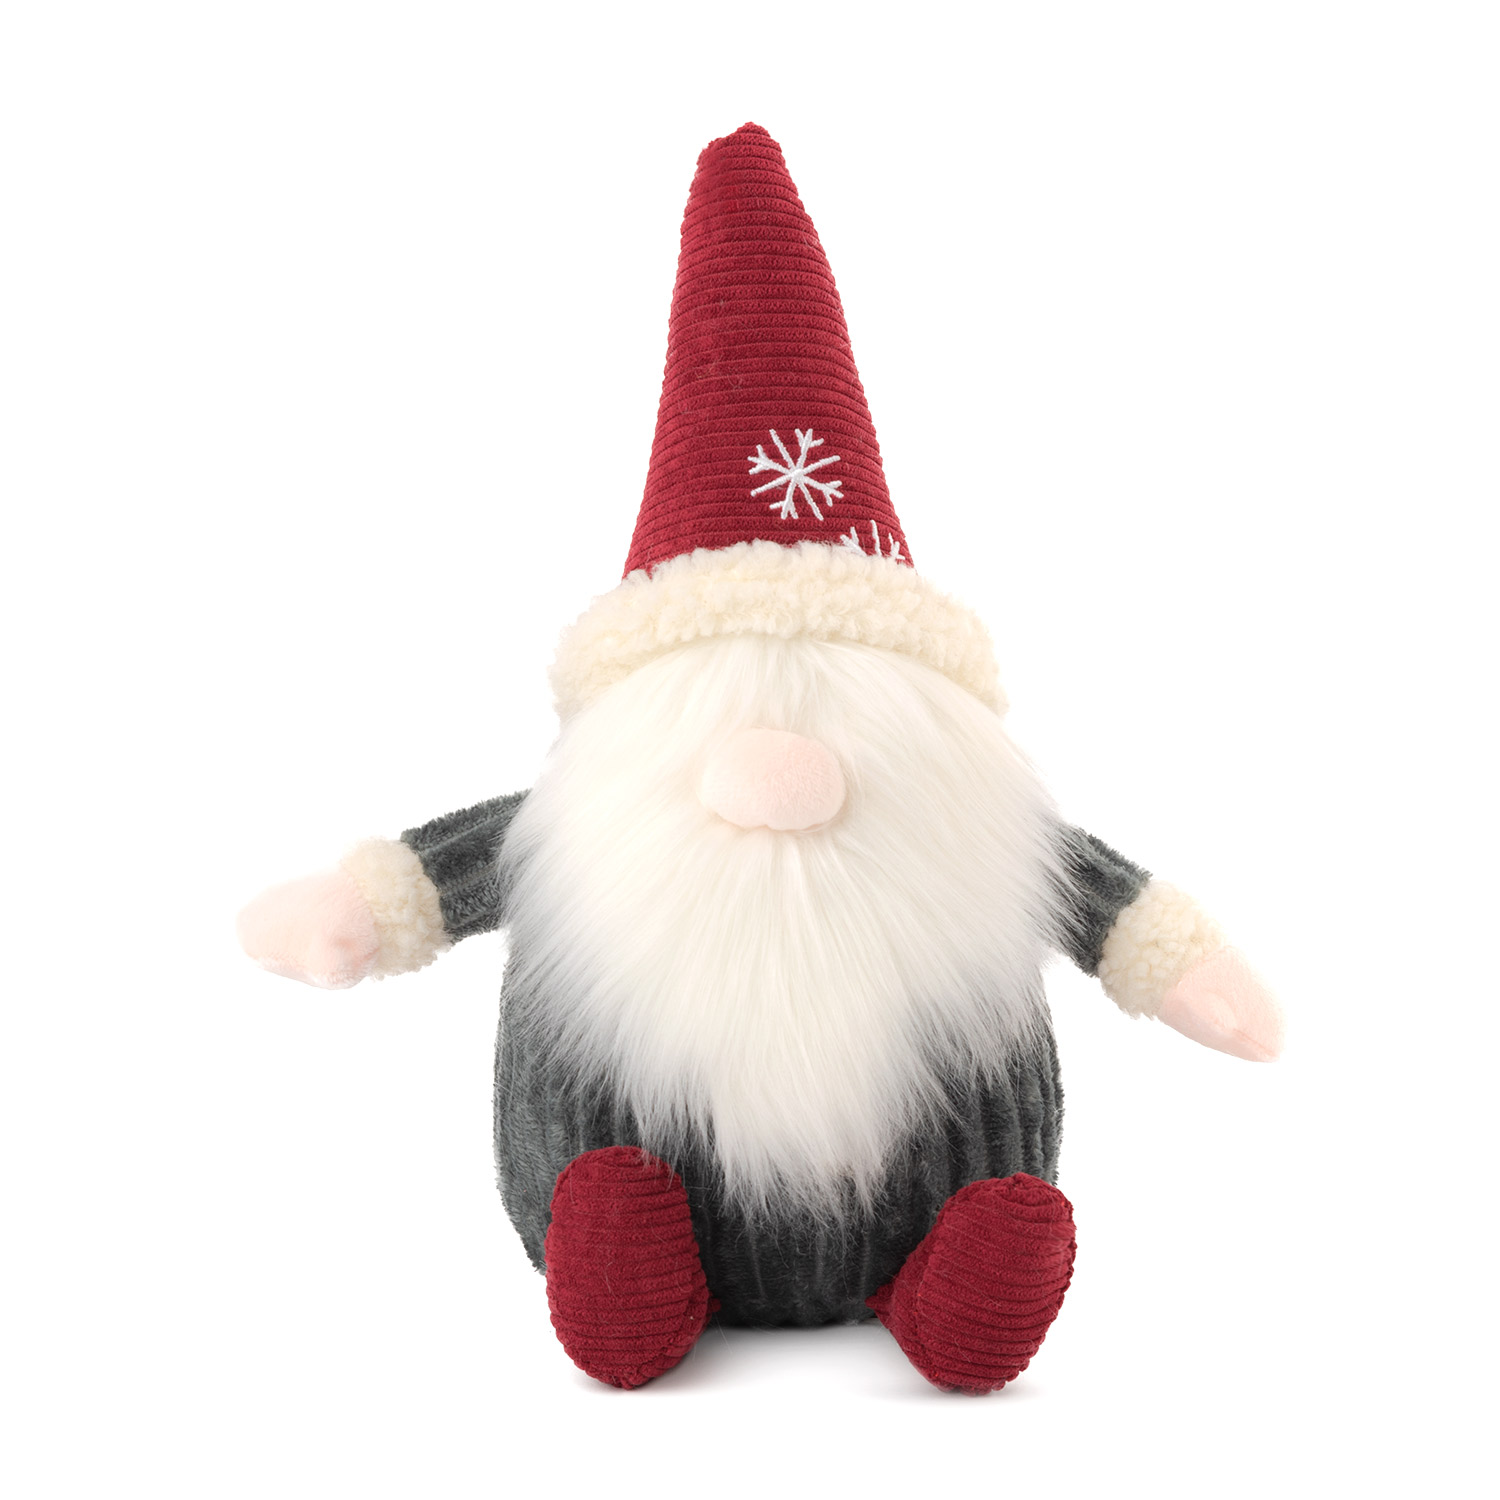 Gnome - Grey with red hat